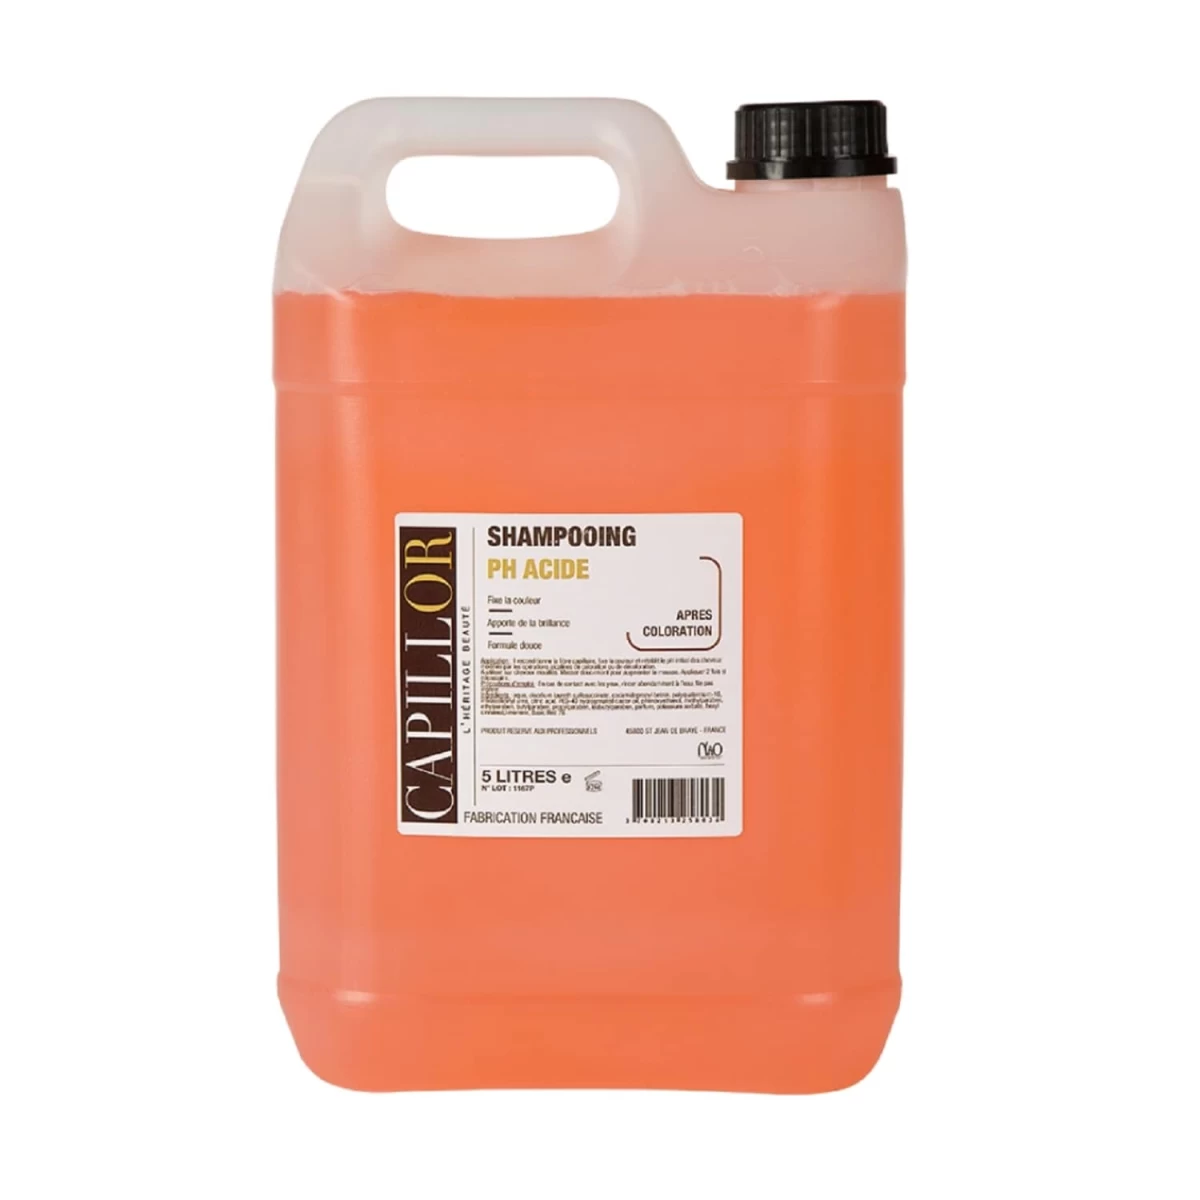 Capillor - Shampoing PH acide 5L